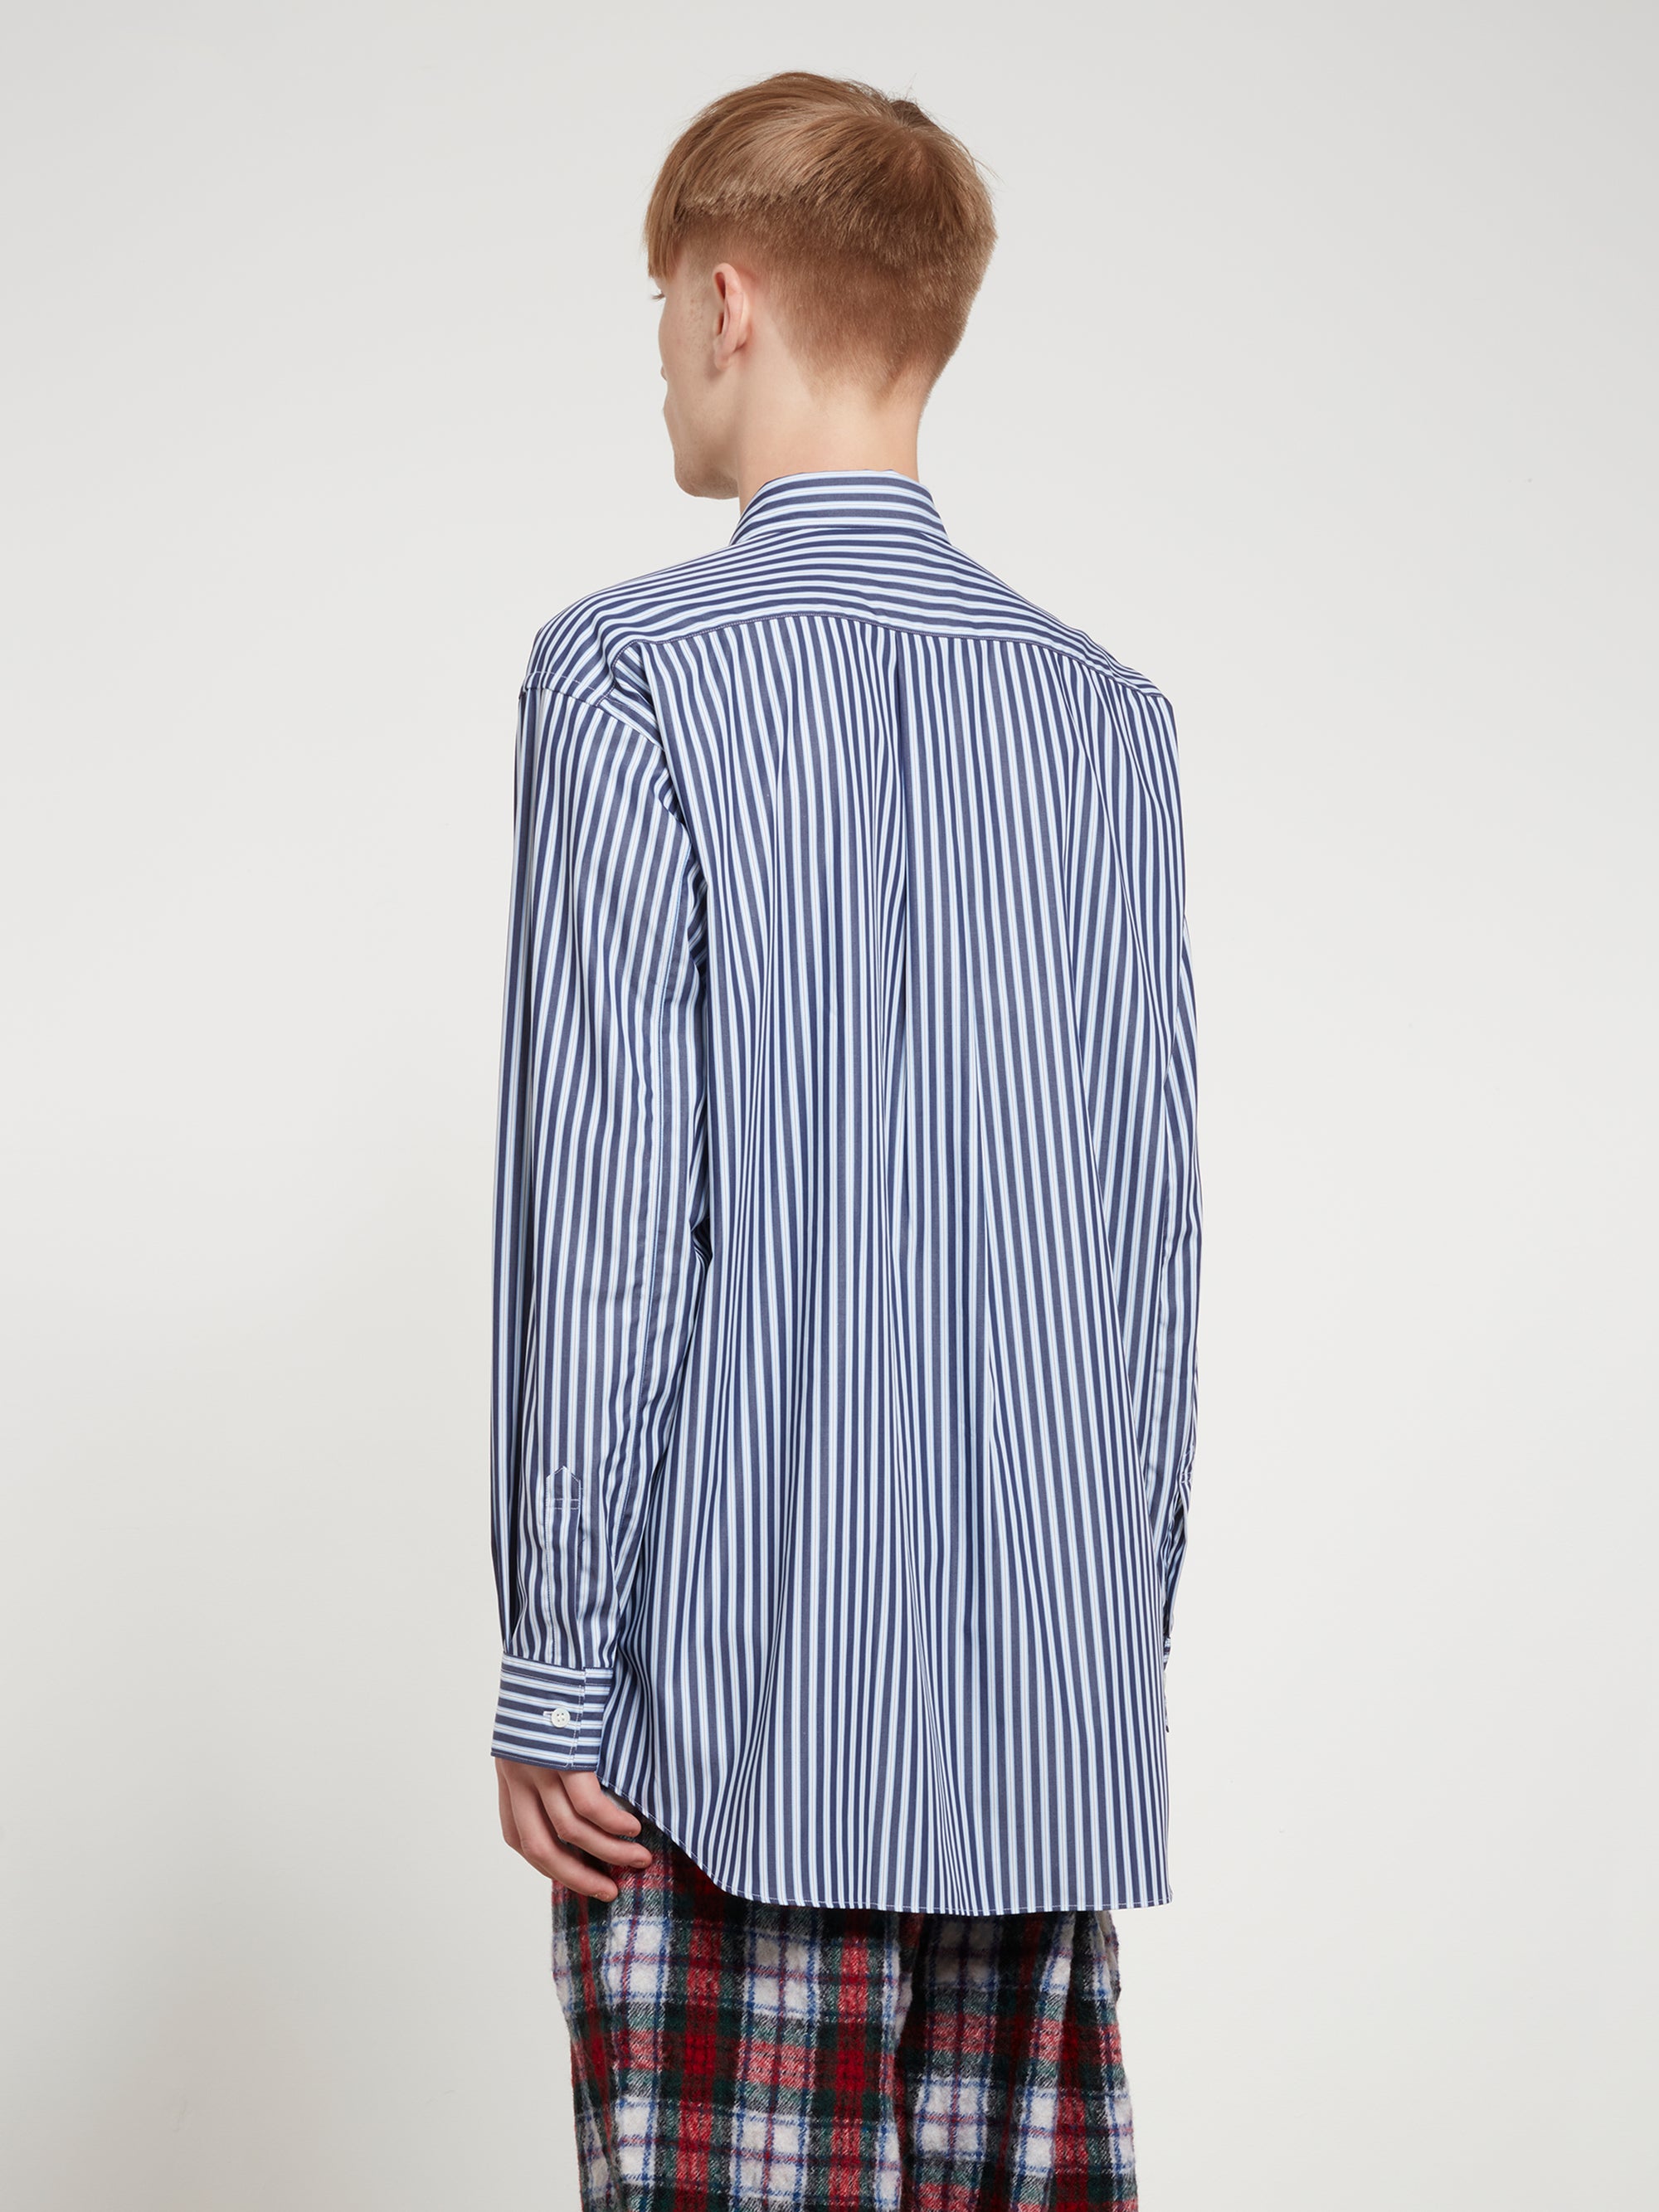 CDG Shirt Forever - Wide Fit Cotton Shirt - (Stripe 3) view 3